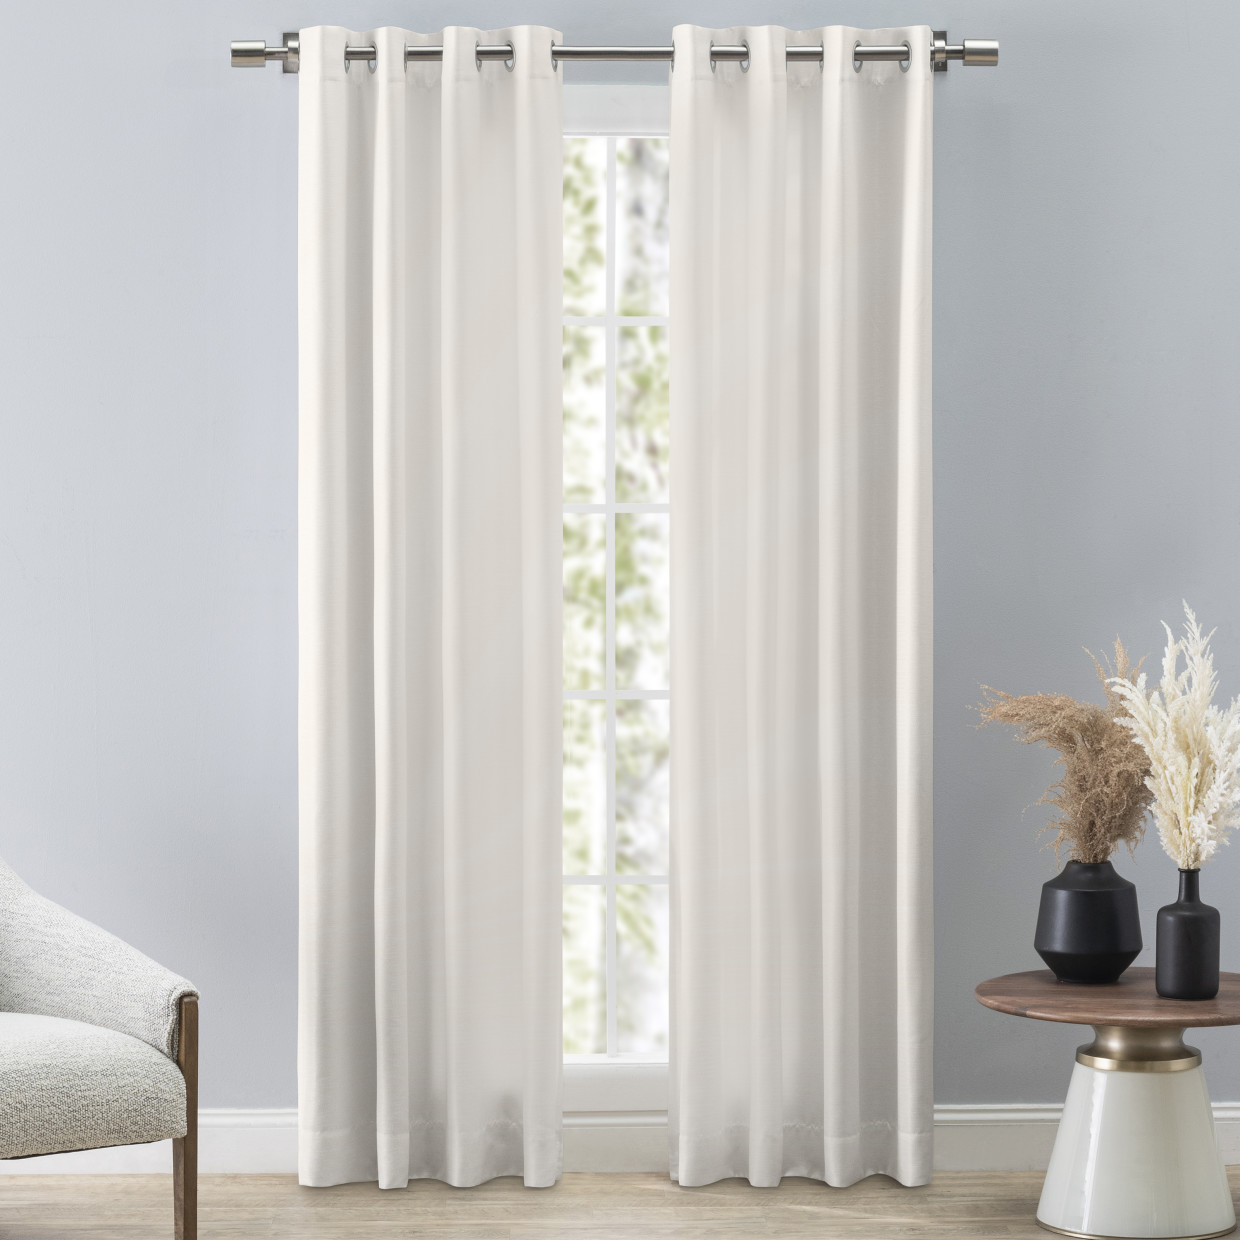 Ricardo Trading Grasscloth Lined Grommet Window Panel Curtain - White ...